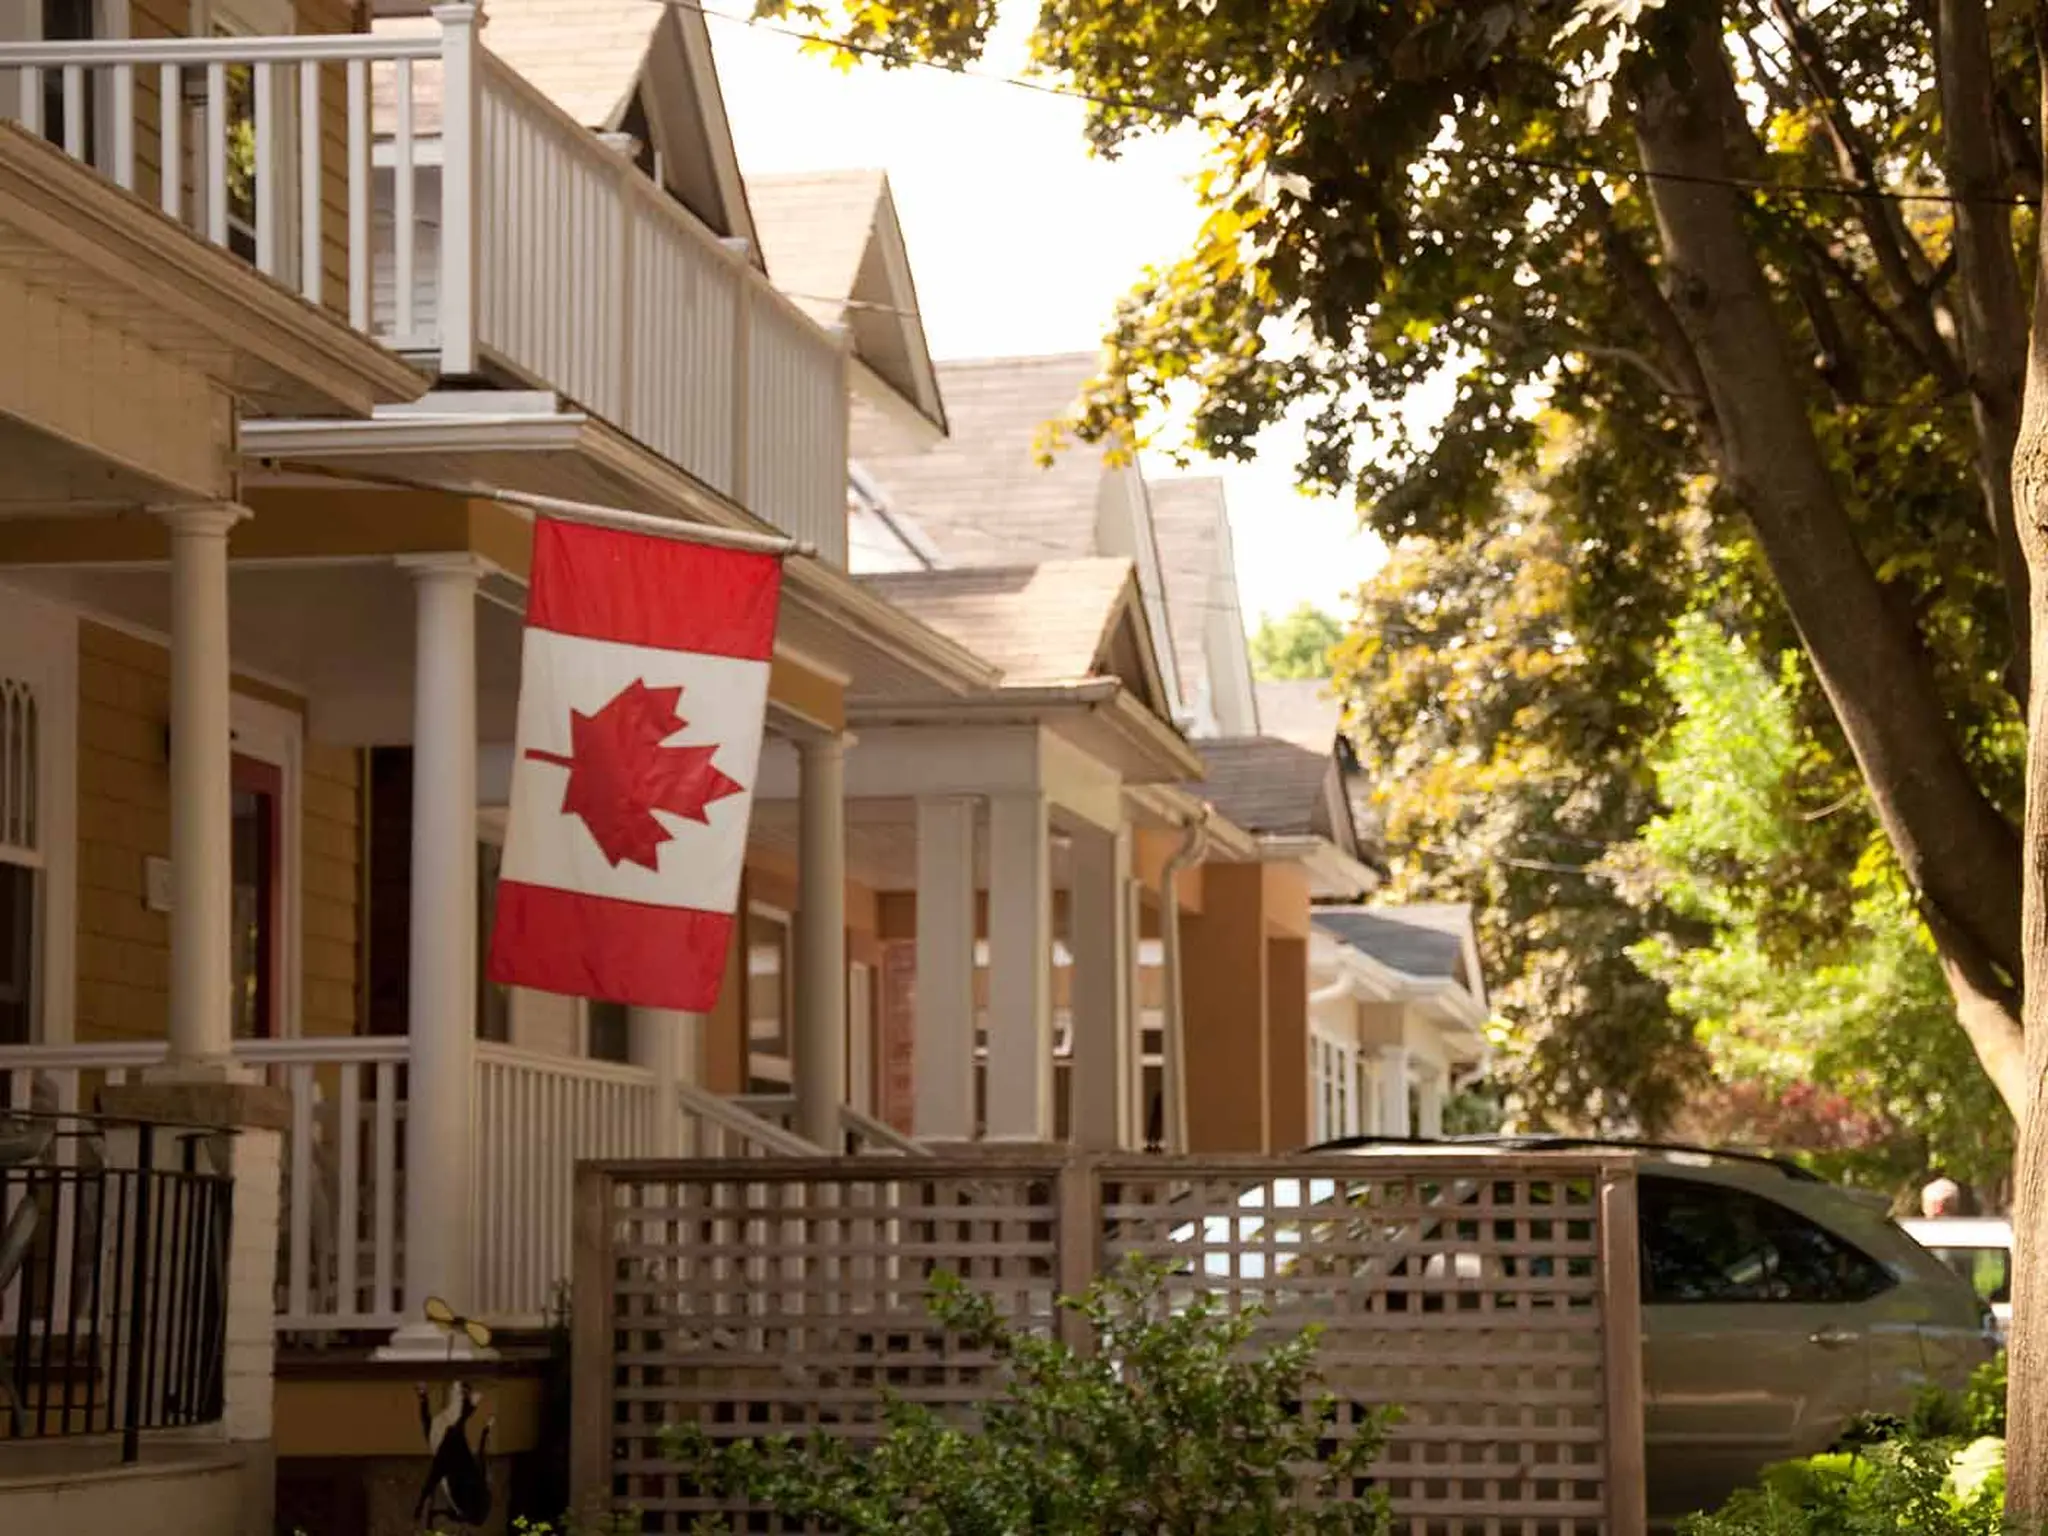 Canada is considering reducing the number of international students due to housing costs